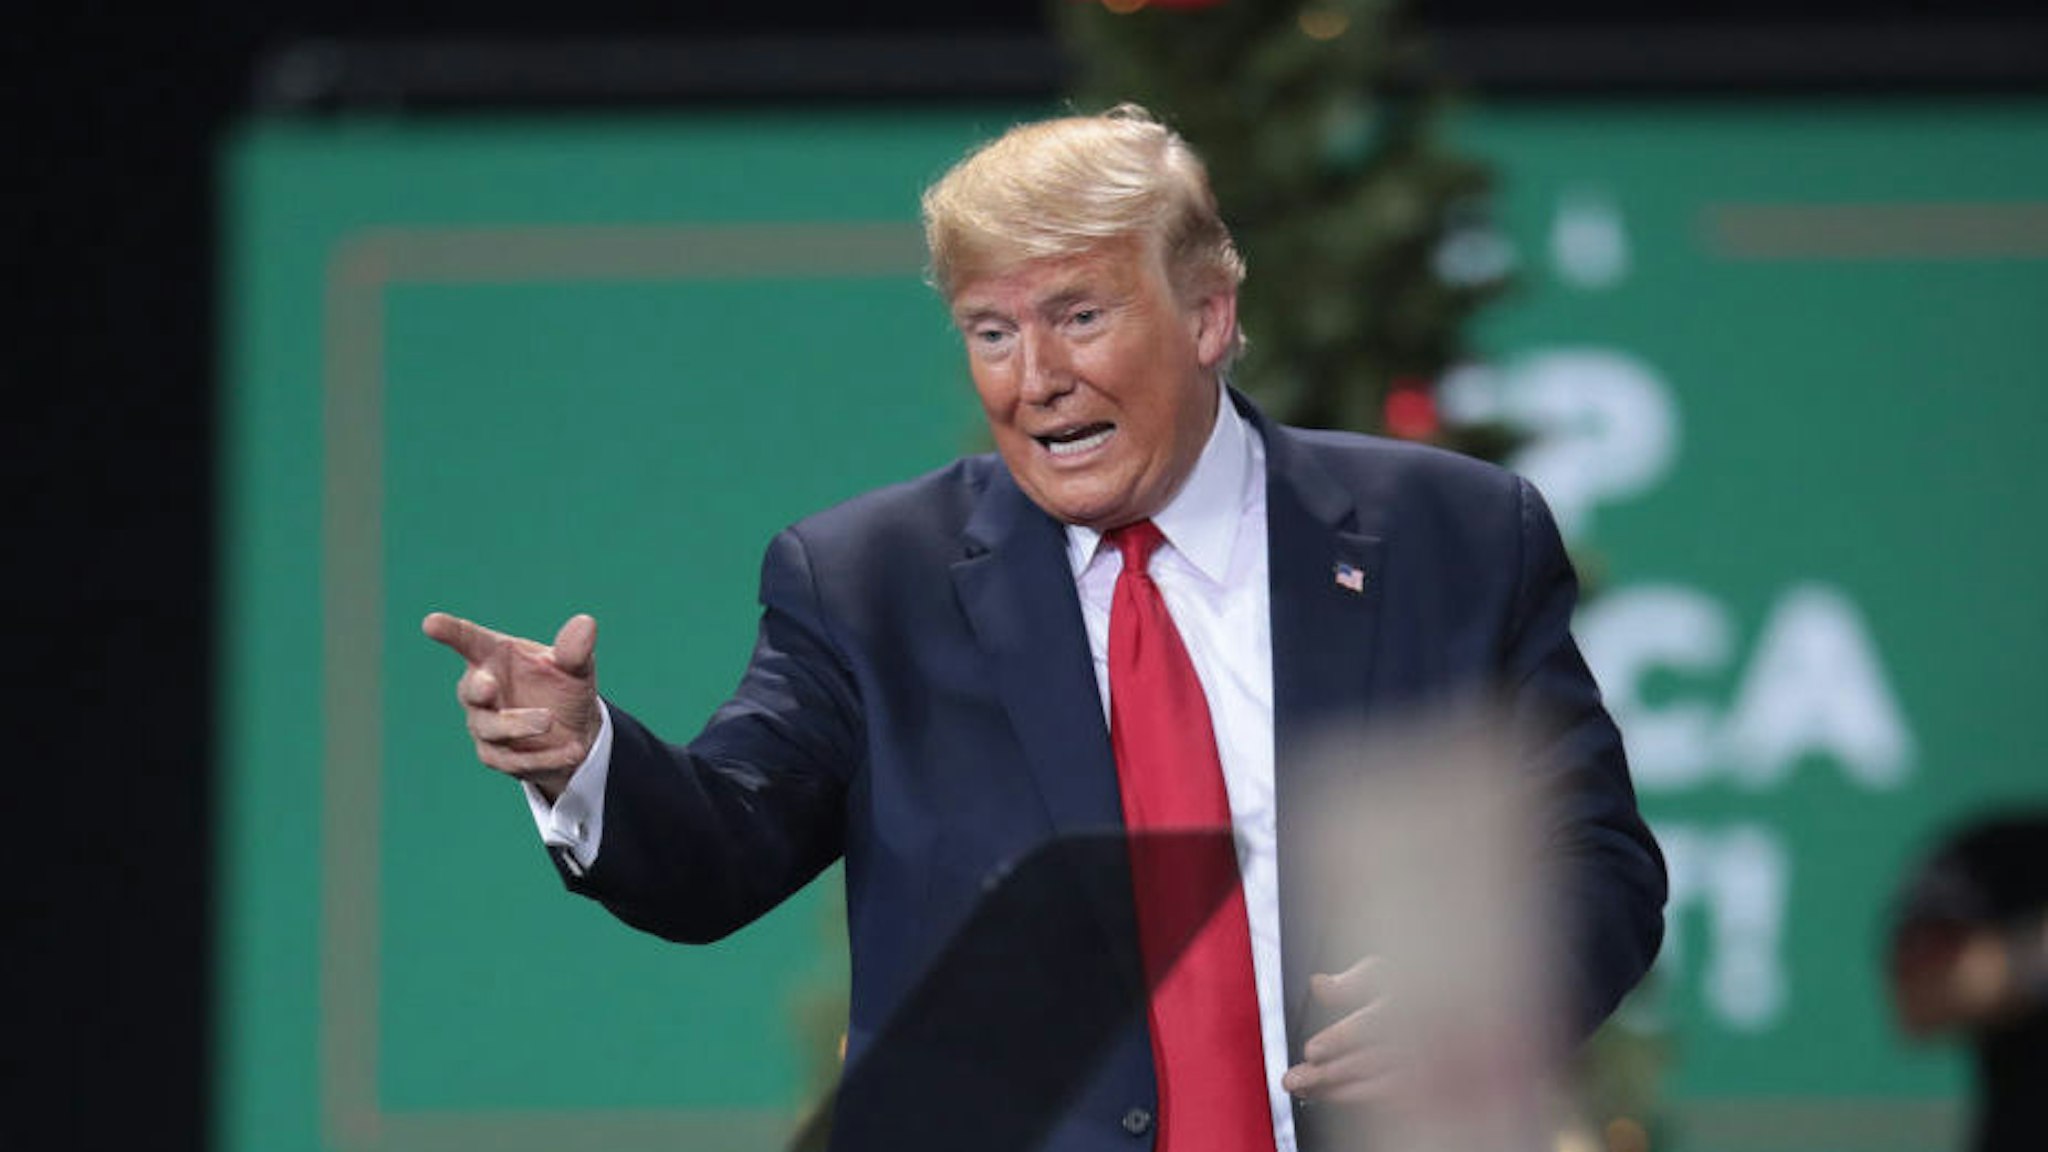 President Donald Trump leaves his Merry Christmas Rally at the Kellogg Arena on December 18, 2019 in Battle Creek, Michigan. While Trump spoke at the rally the House of Representatives voted, mostly along party lines, to impeach the president for abuse of power and obstruction of Congress, making him just the third president in U.S. history to be impeached. (Photo by Scott Olson/Getty Images)